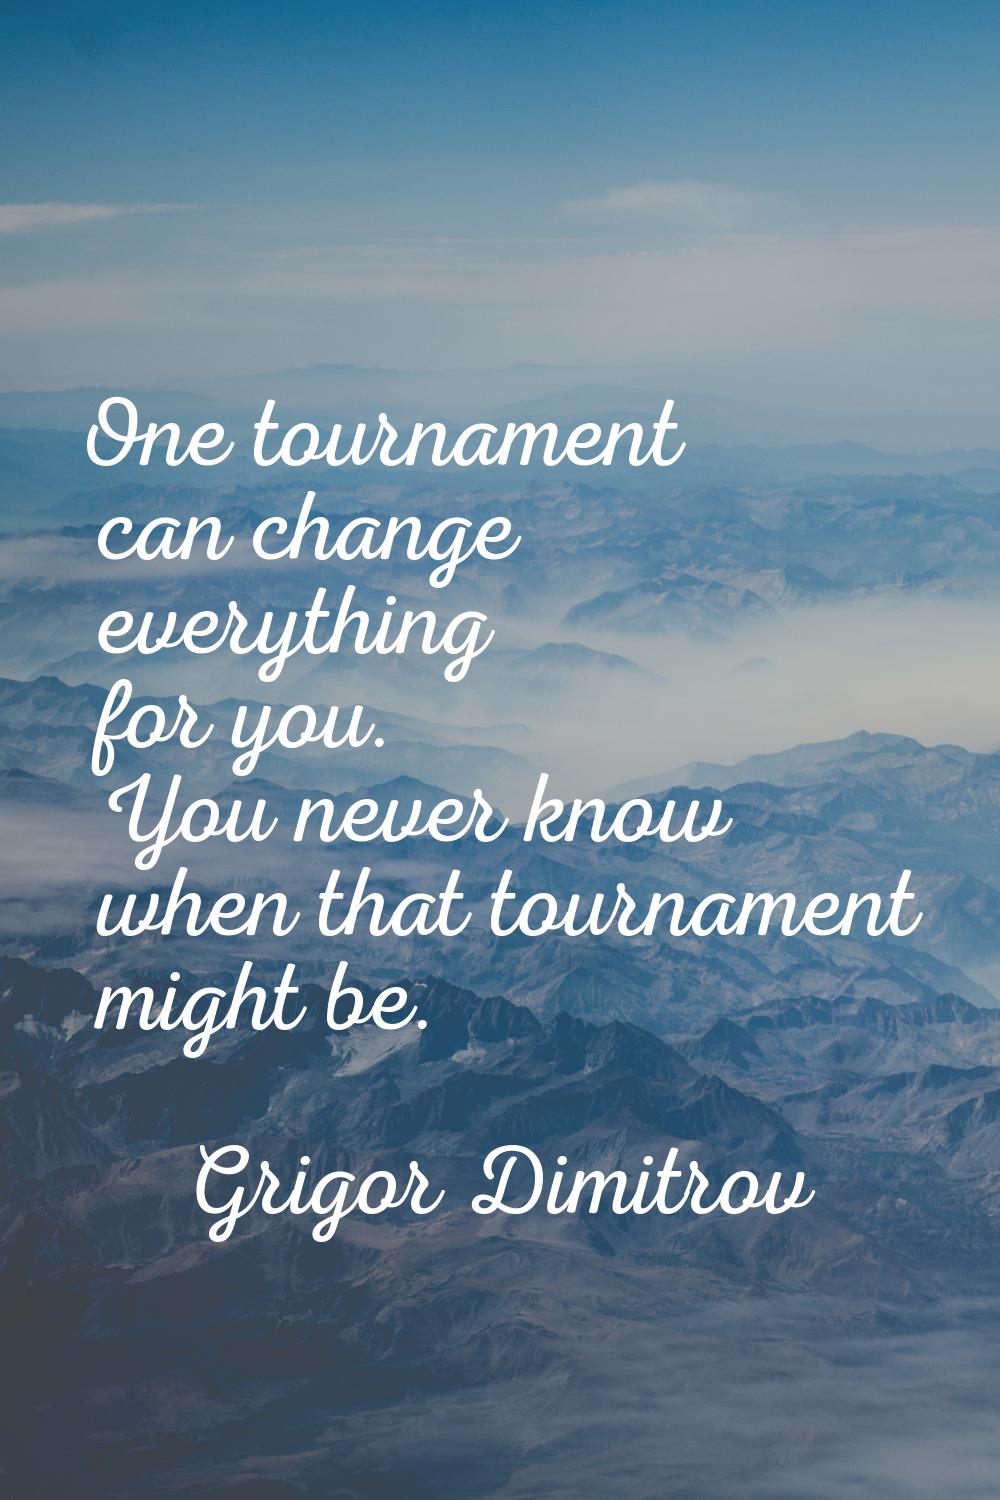 One tournament can change everything for you. You never know when that tournament might be.